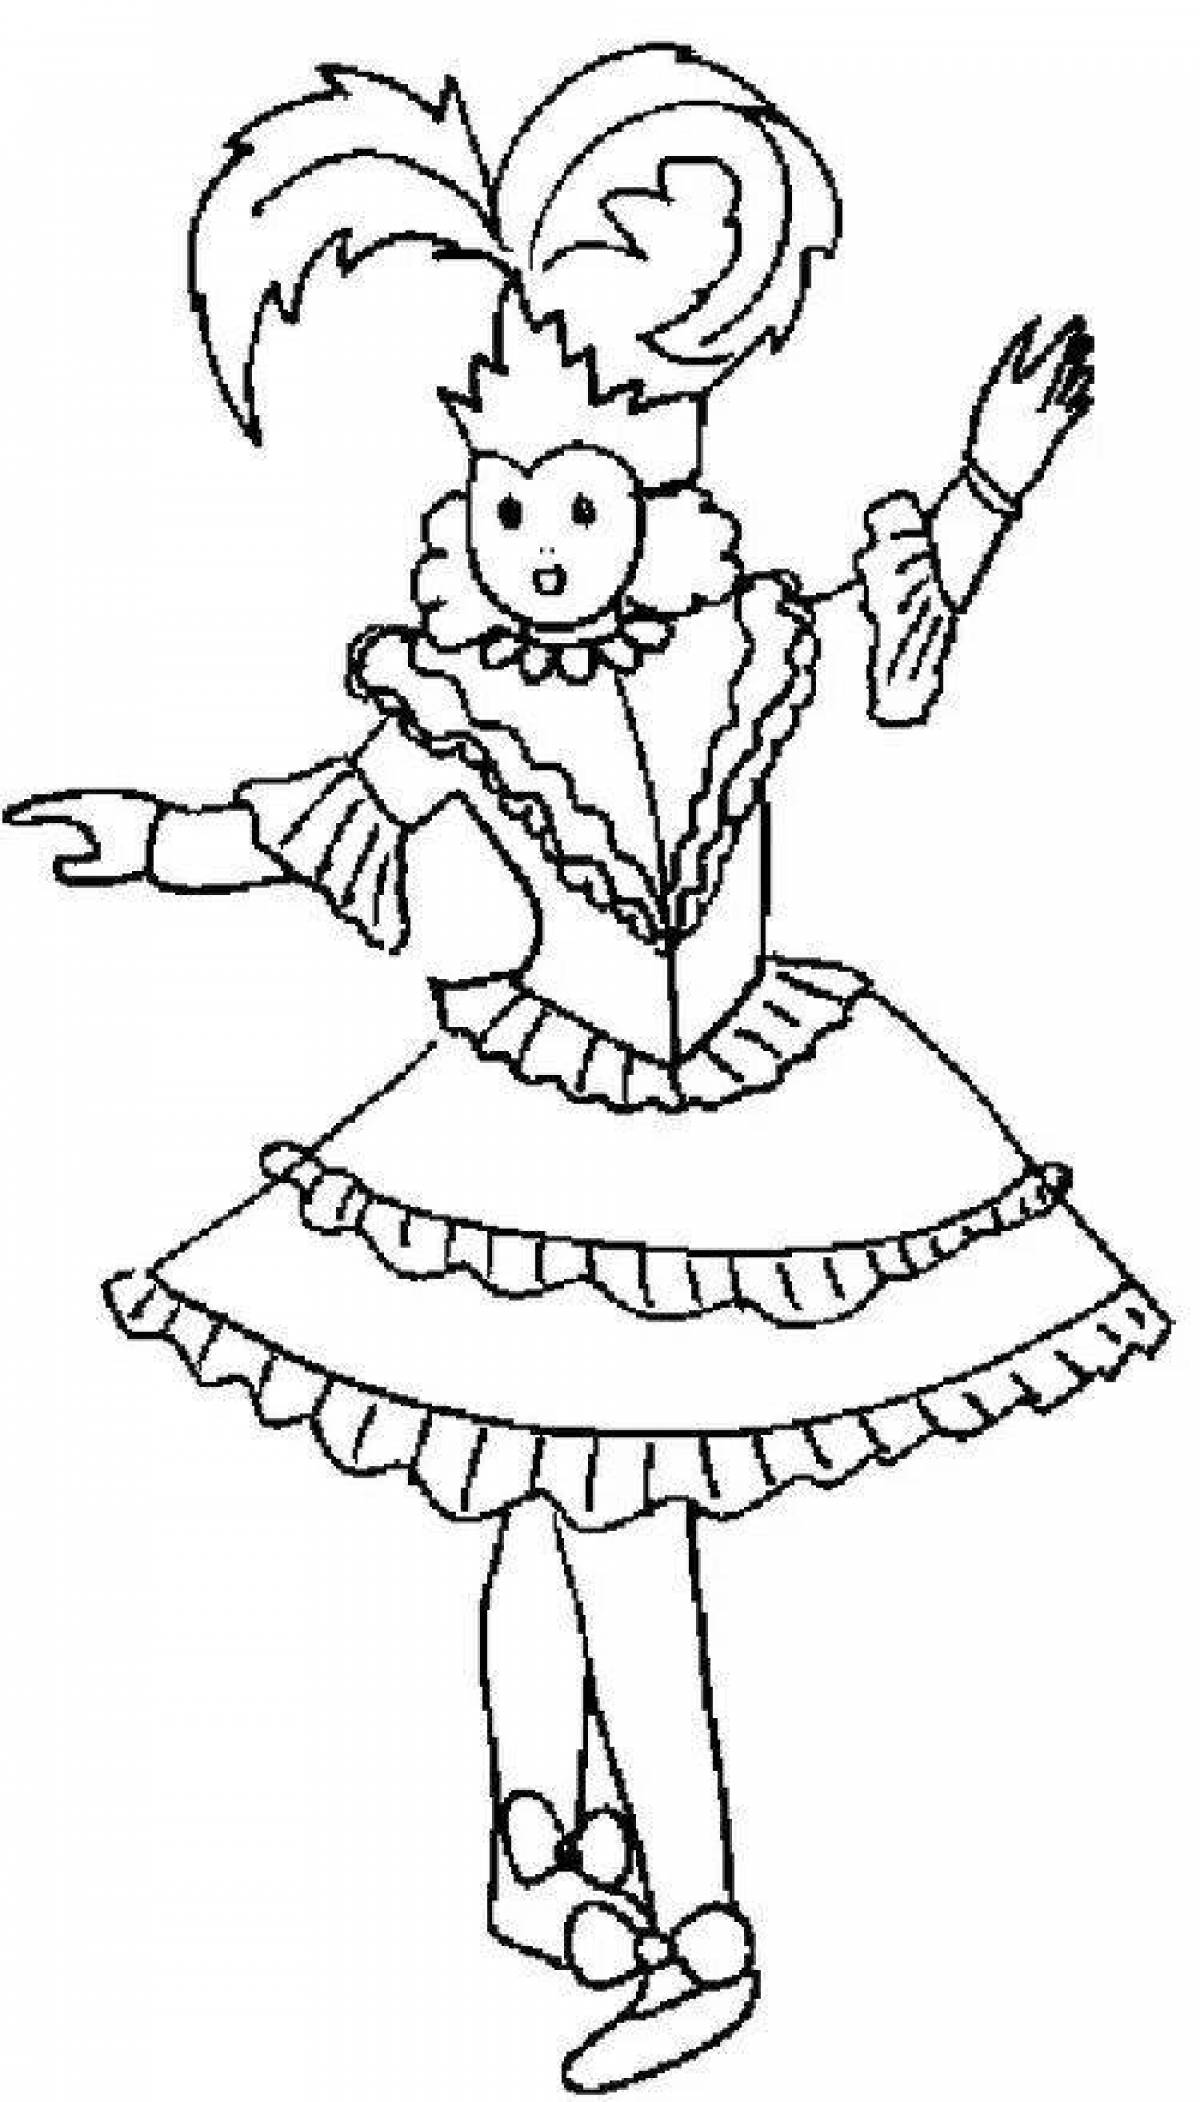 Coloring page unusual theatrical costume